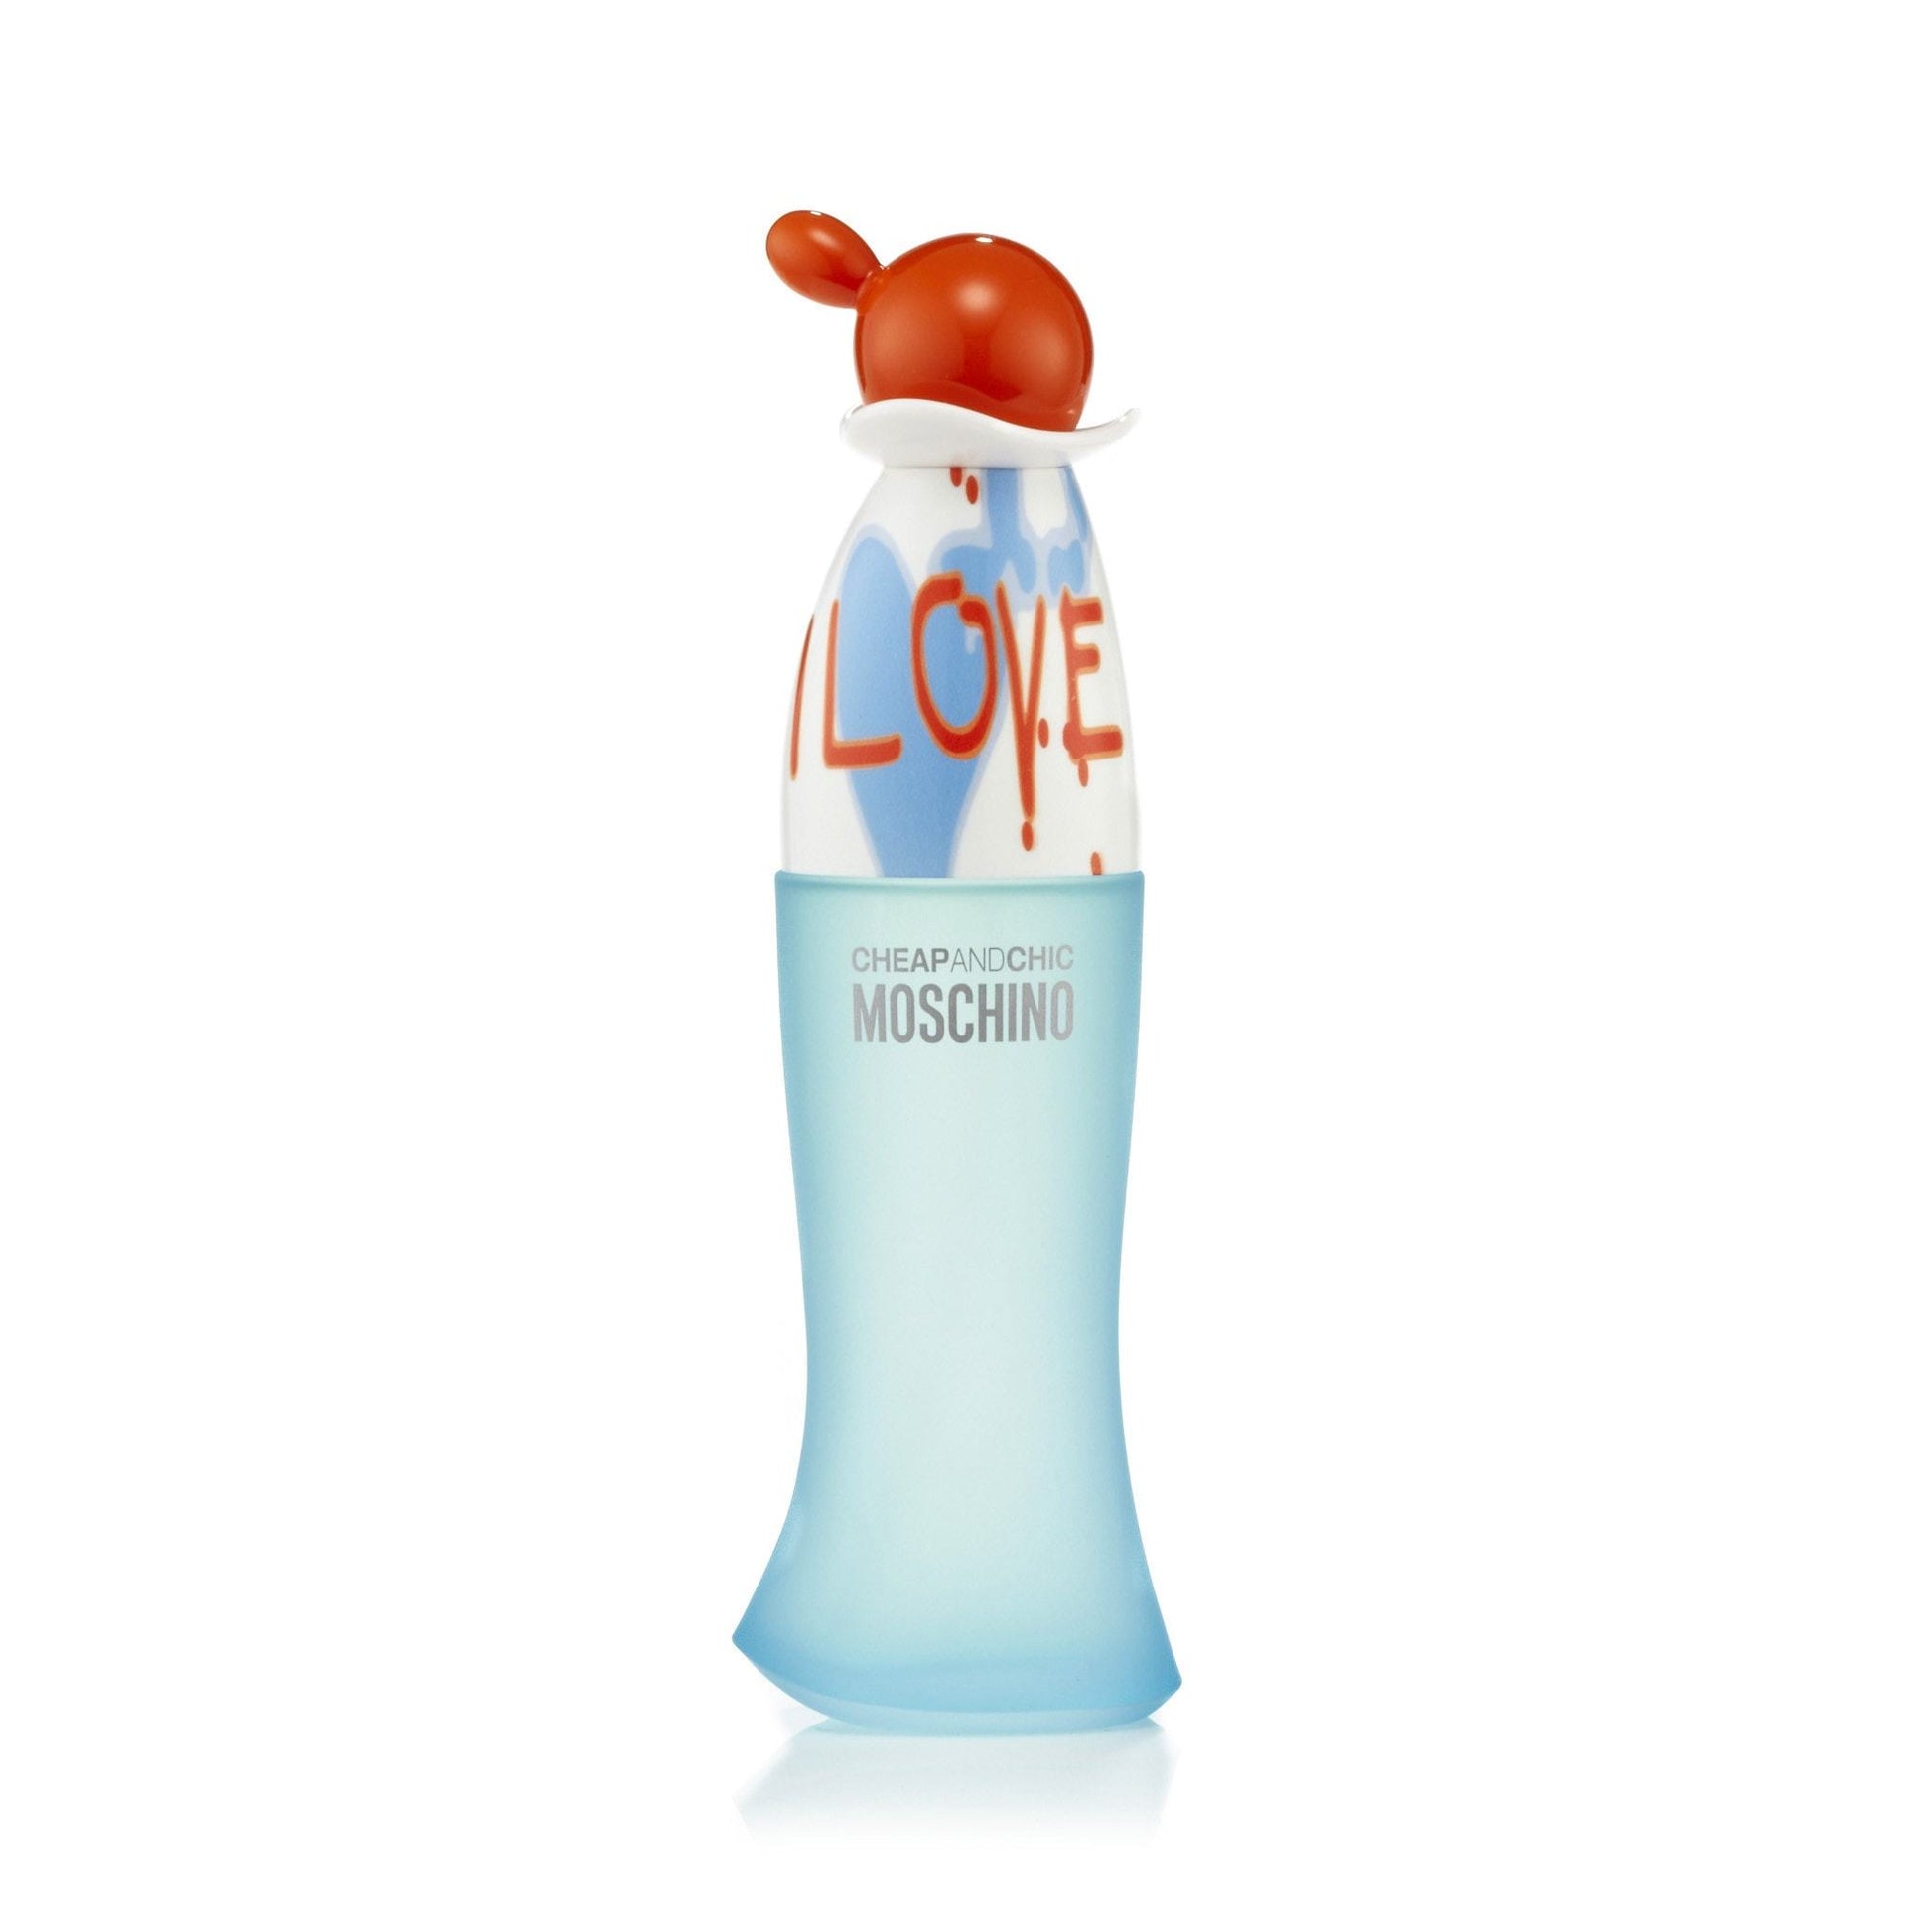 Women by Moschino – I Outlet Love for Love EDT Fragrance